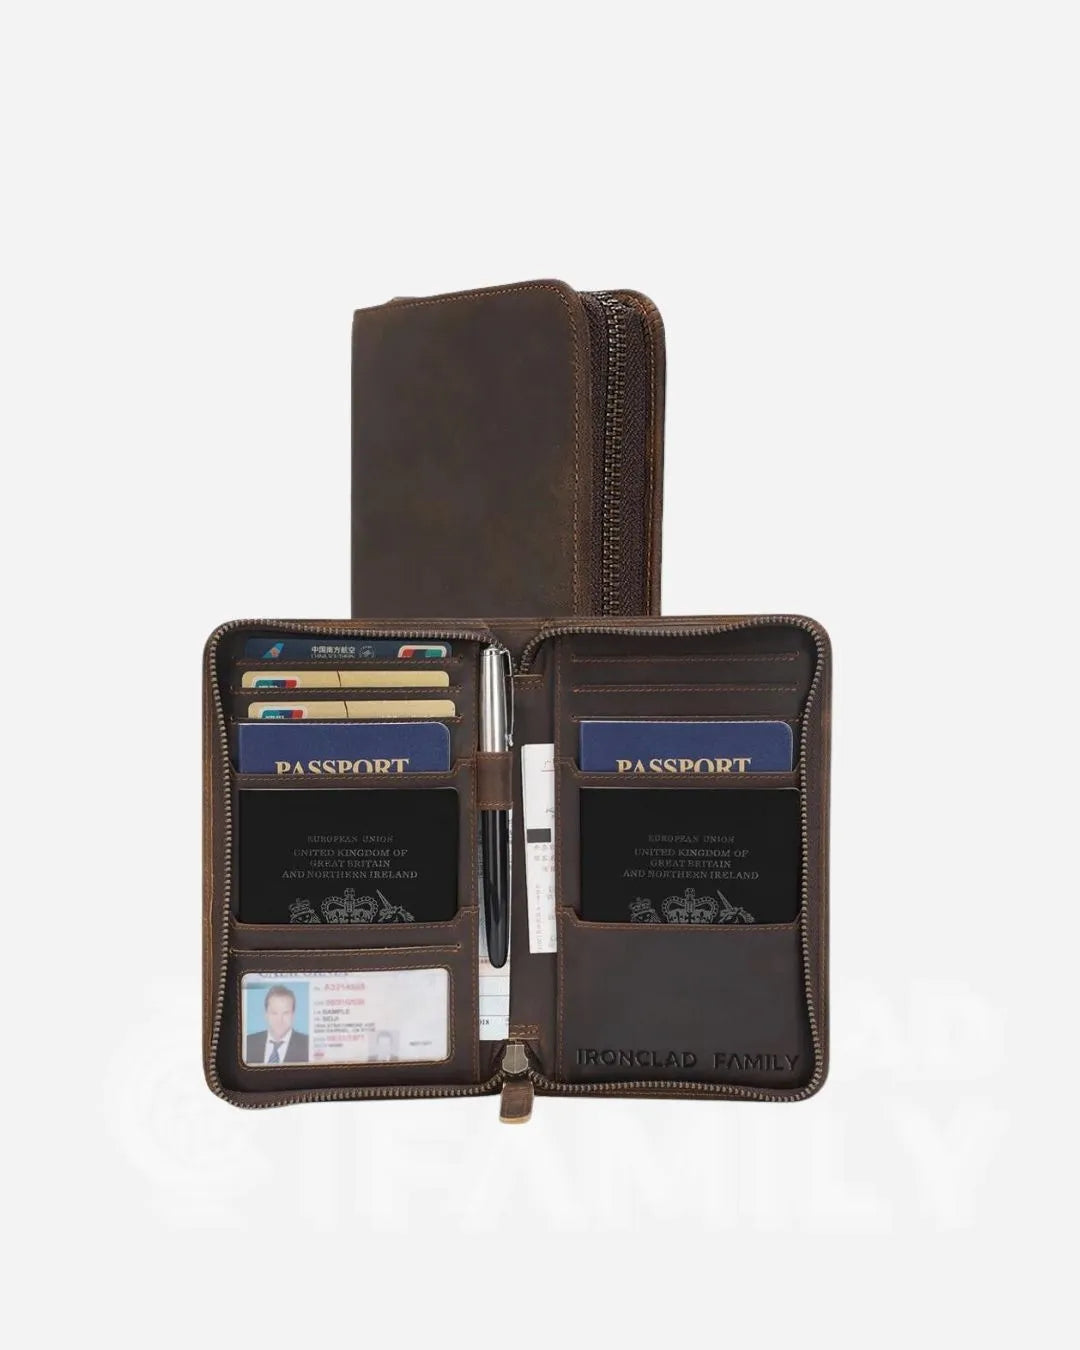 RFID blocking cowhide leather multi-passport holder with a passport and additional items inside